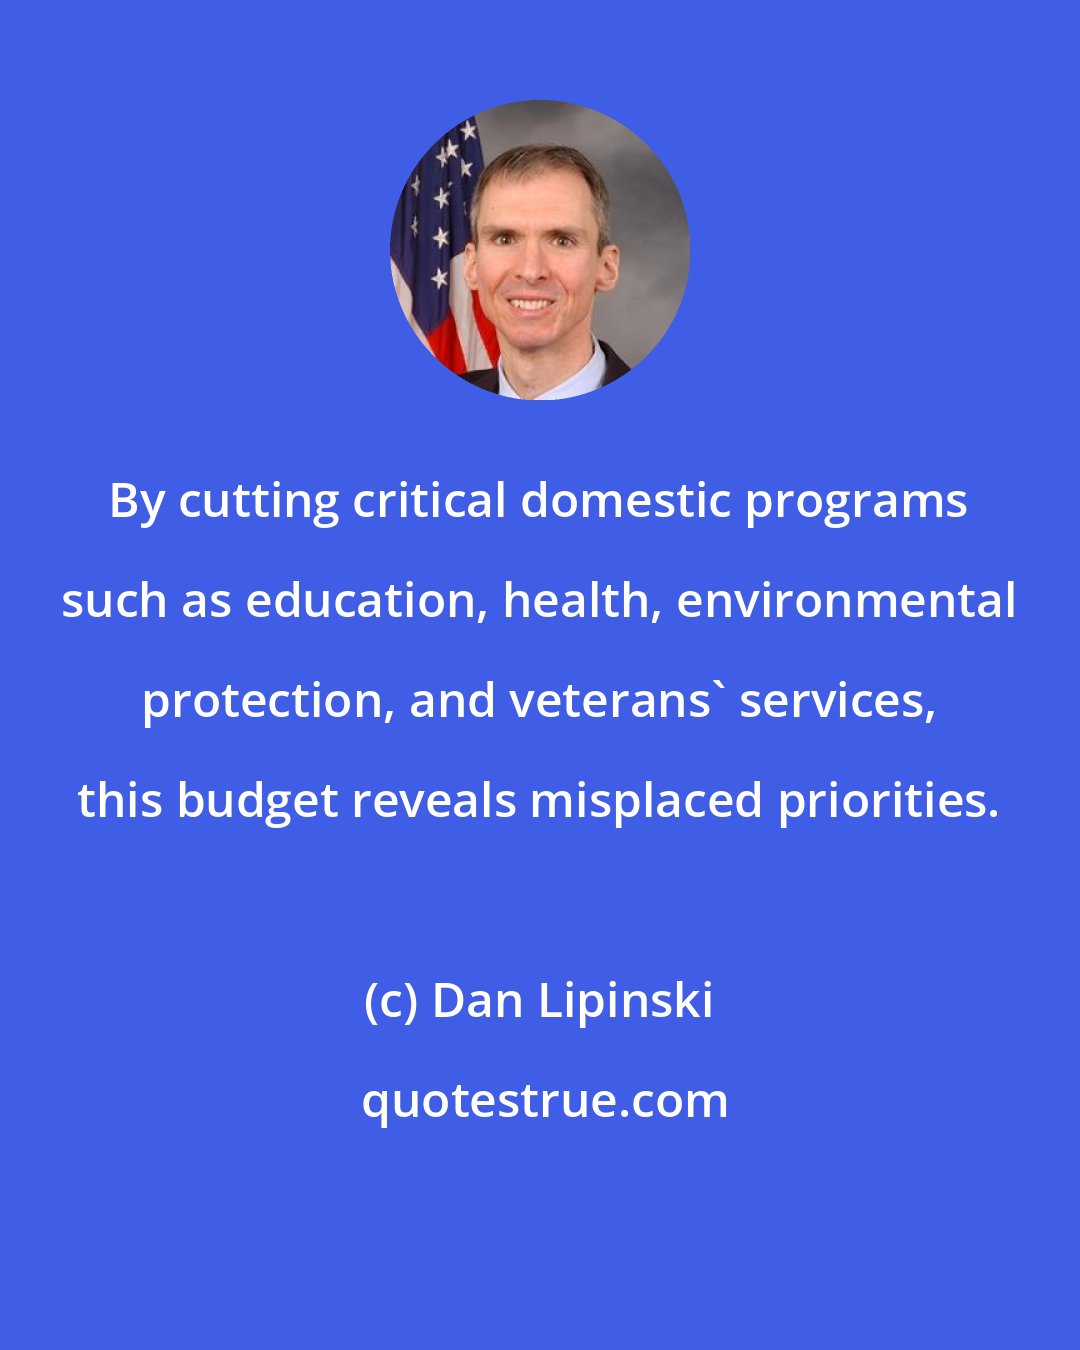 Dan Lipinski: By cutting critical domestic programs such as education, health, environmental protection, and veterans' services, this budget reveals misplaced priorities.